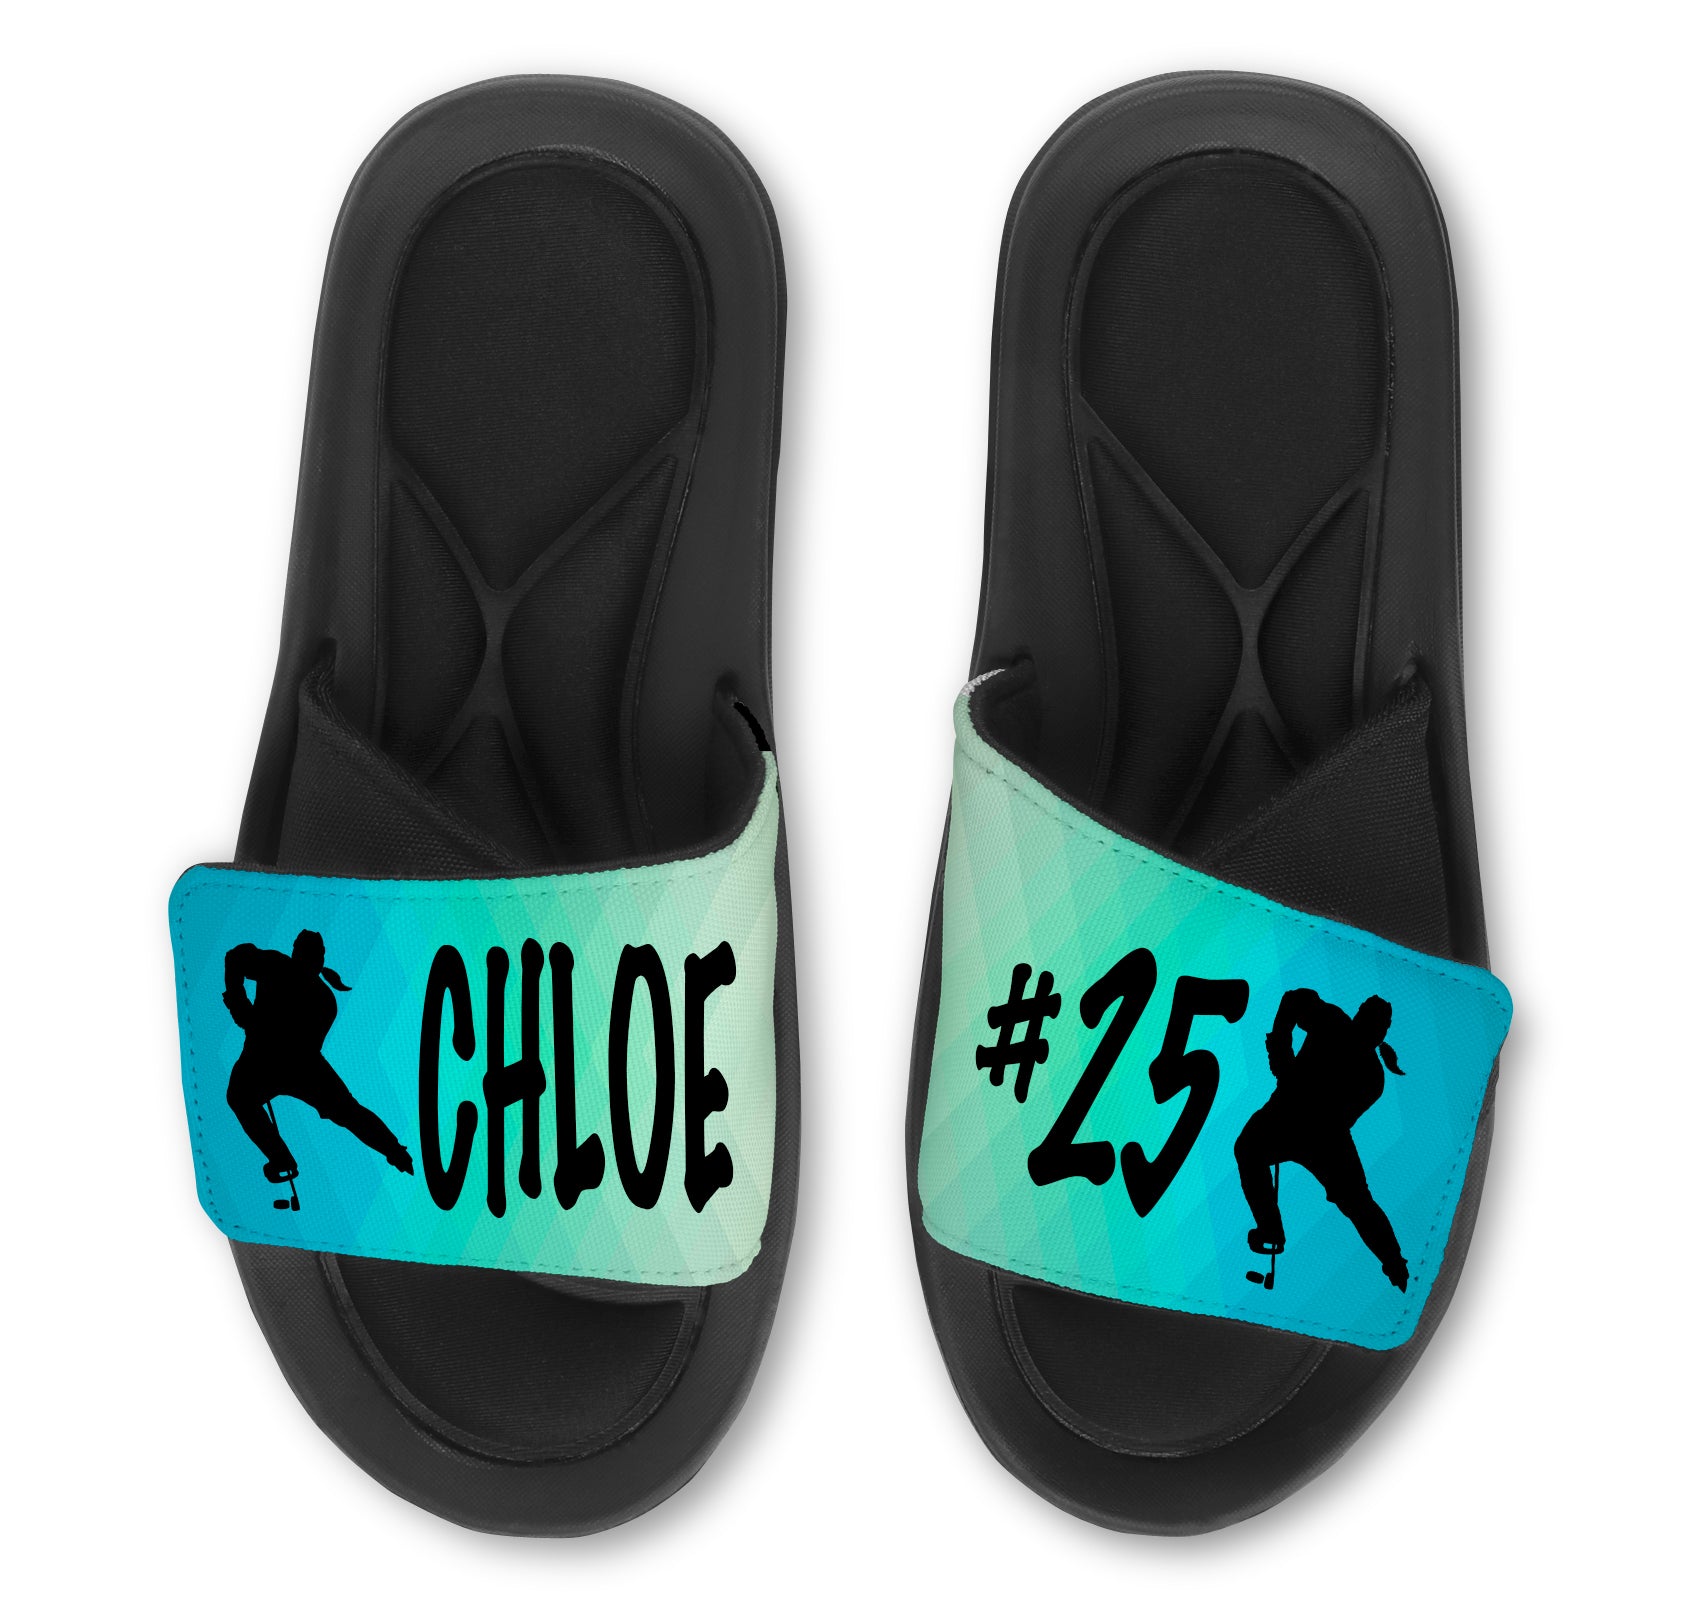 Hockey Abstract Custom Slides / Sandals - Choose your Background!